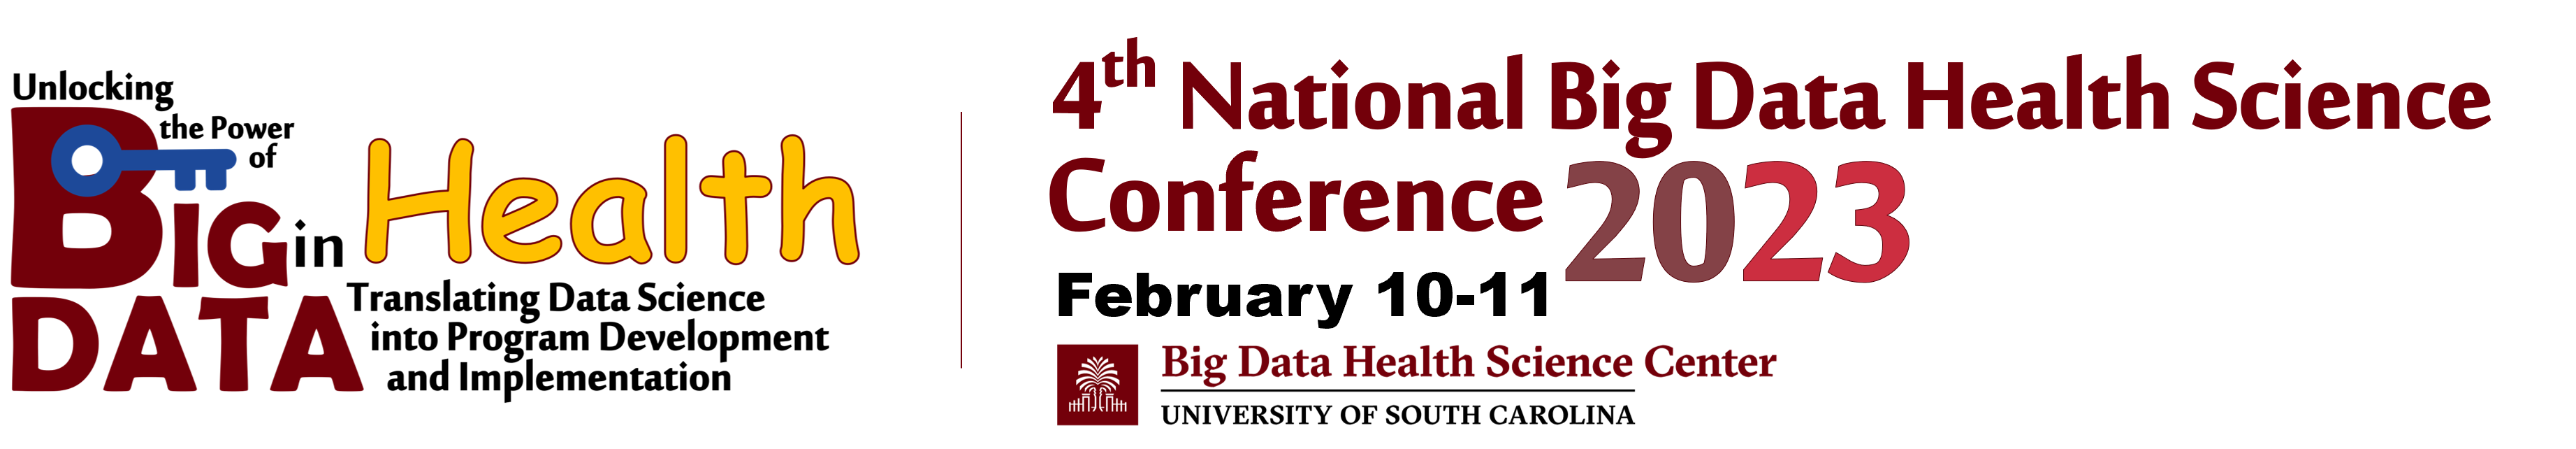 SC Big Data Health Science Center Conference 2023